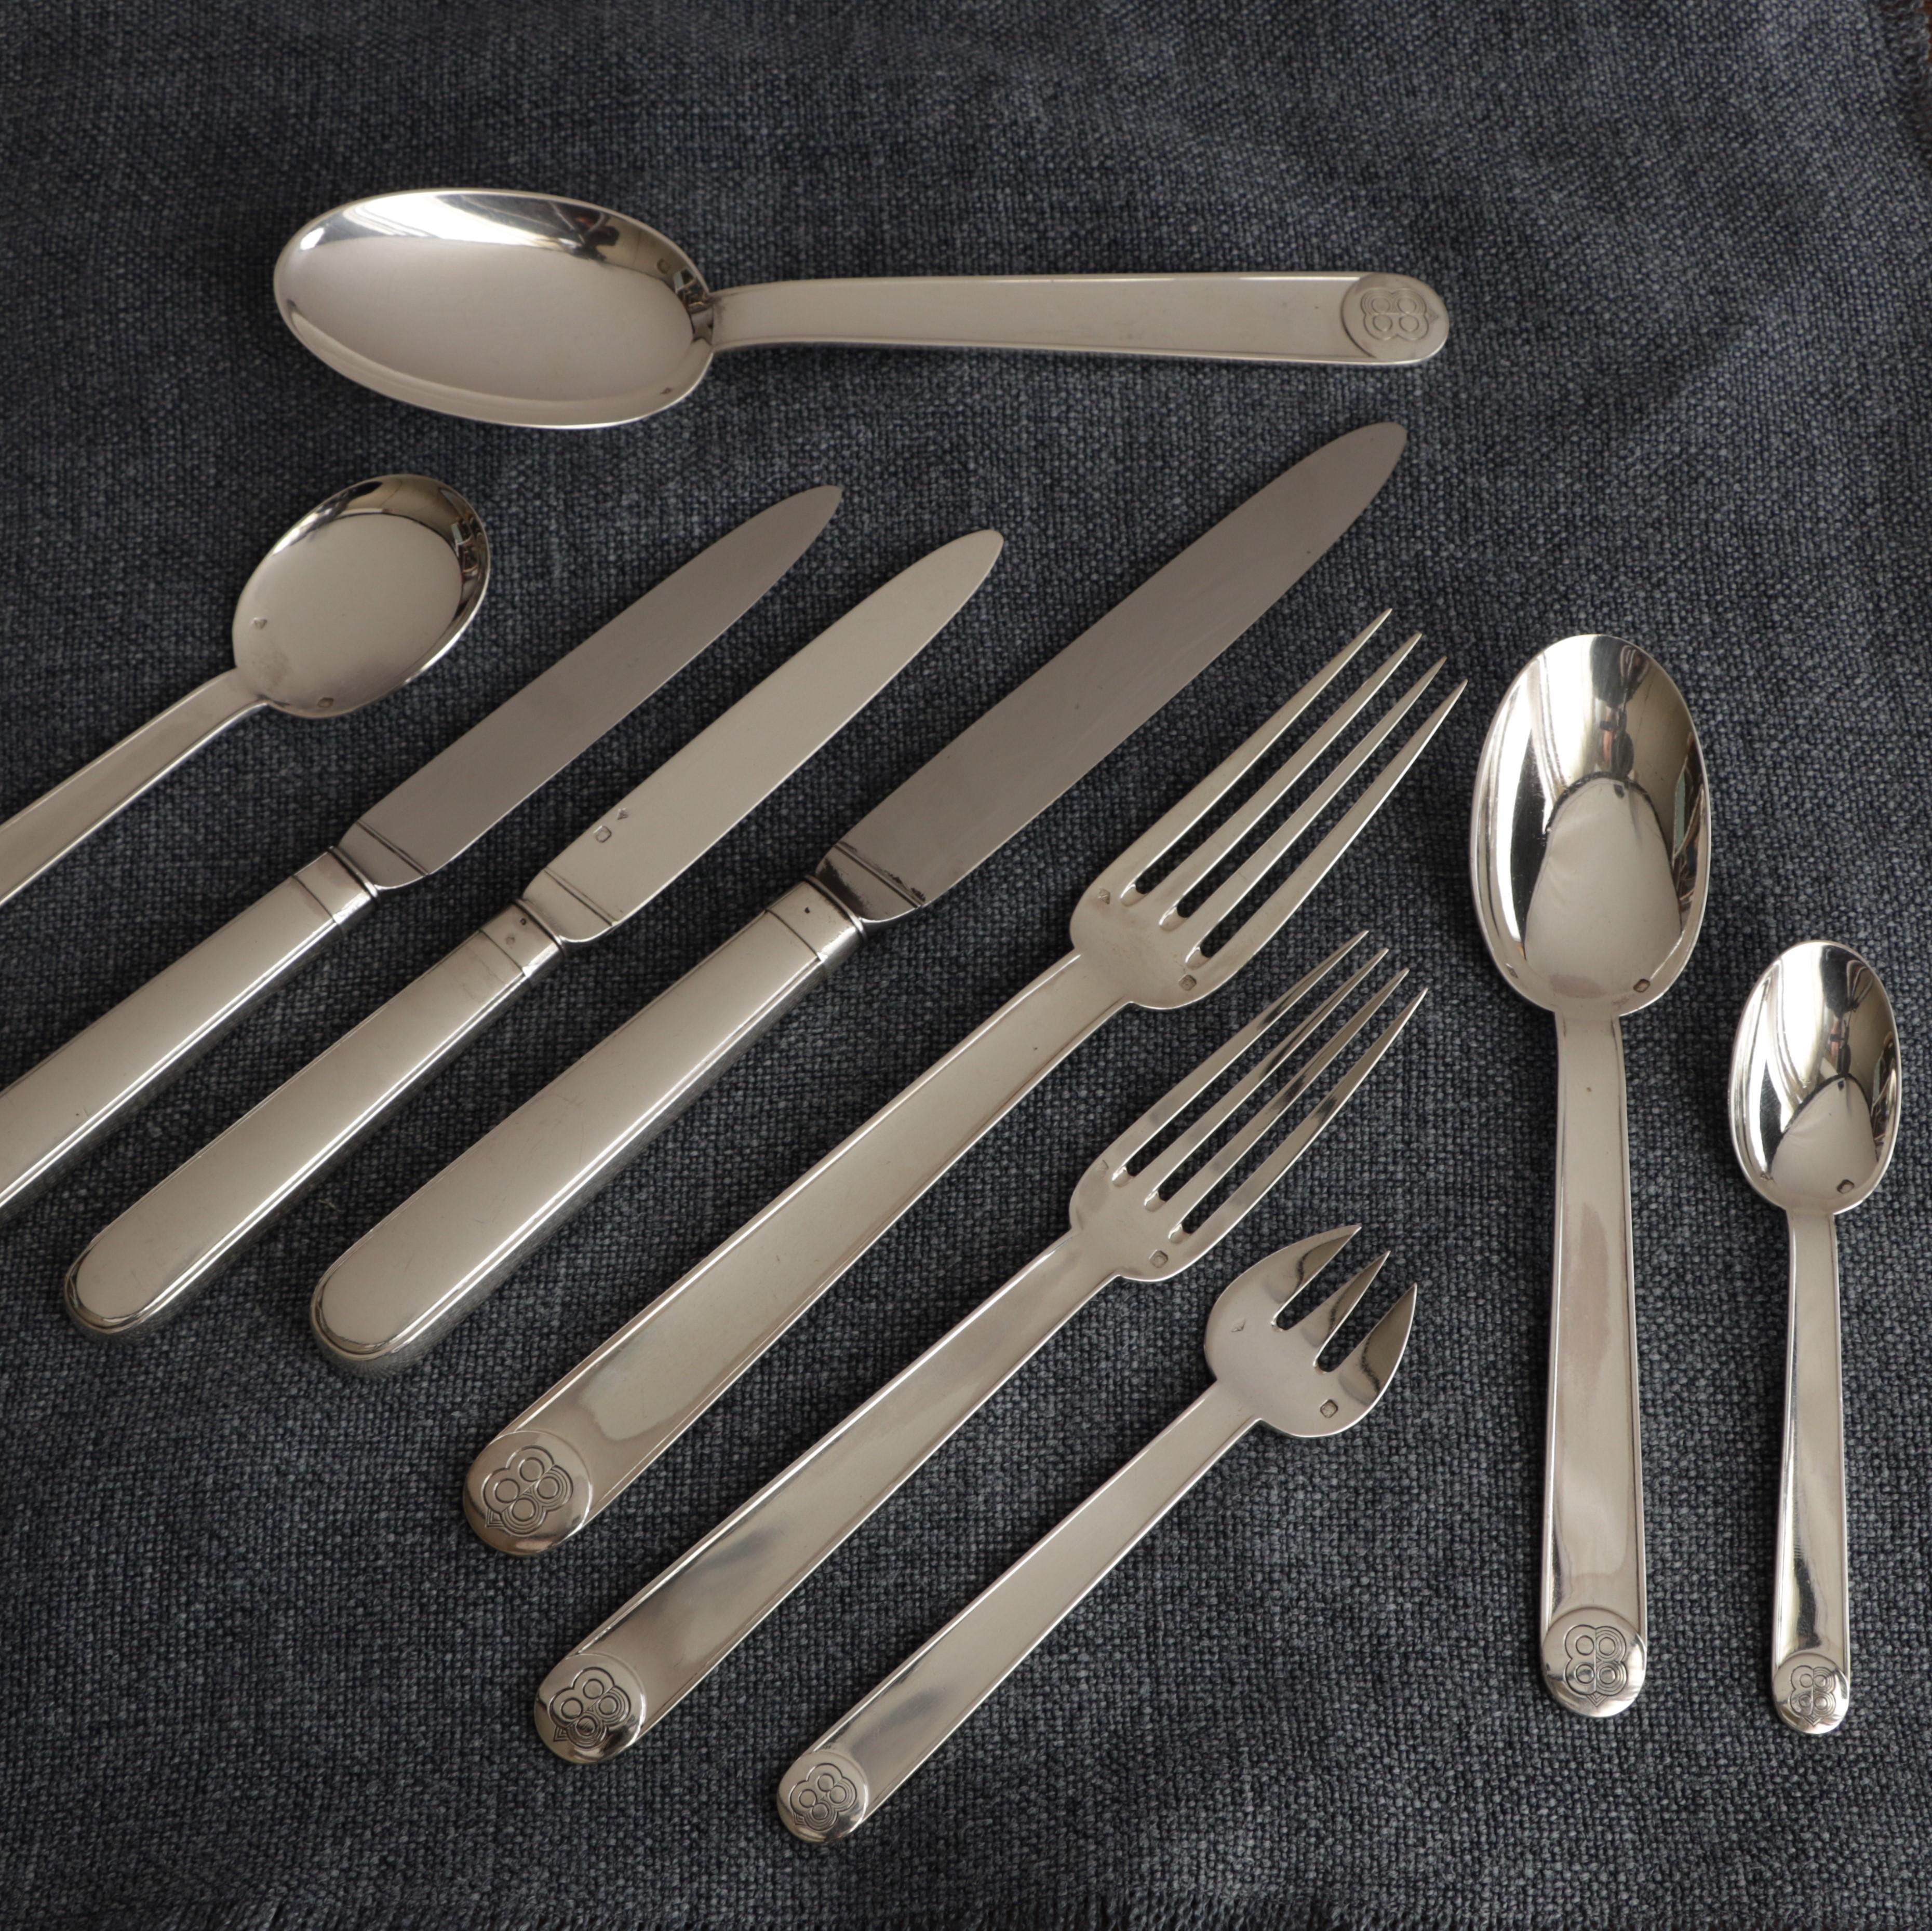 This cutlery set is Jean E. Puiforcat's Normandy model. Made of plain silver, the cutlery has handles decorated with a round numbered pastille.
This cutlery, dated 1934, was chosen by Compagnie Générale Transatlantique to equip one of the